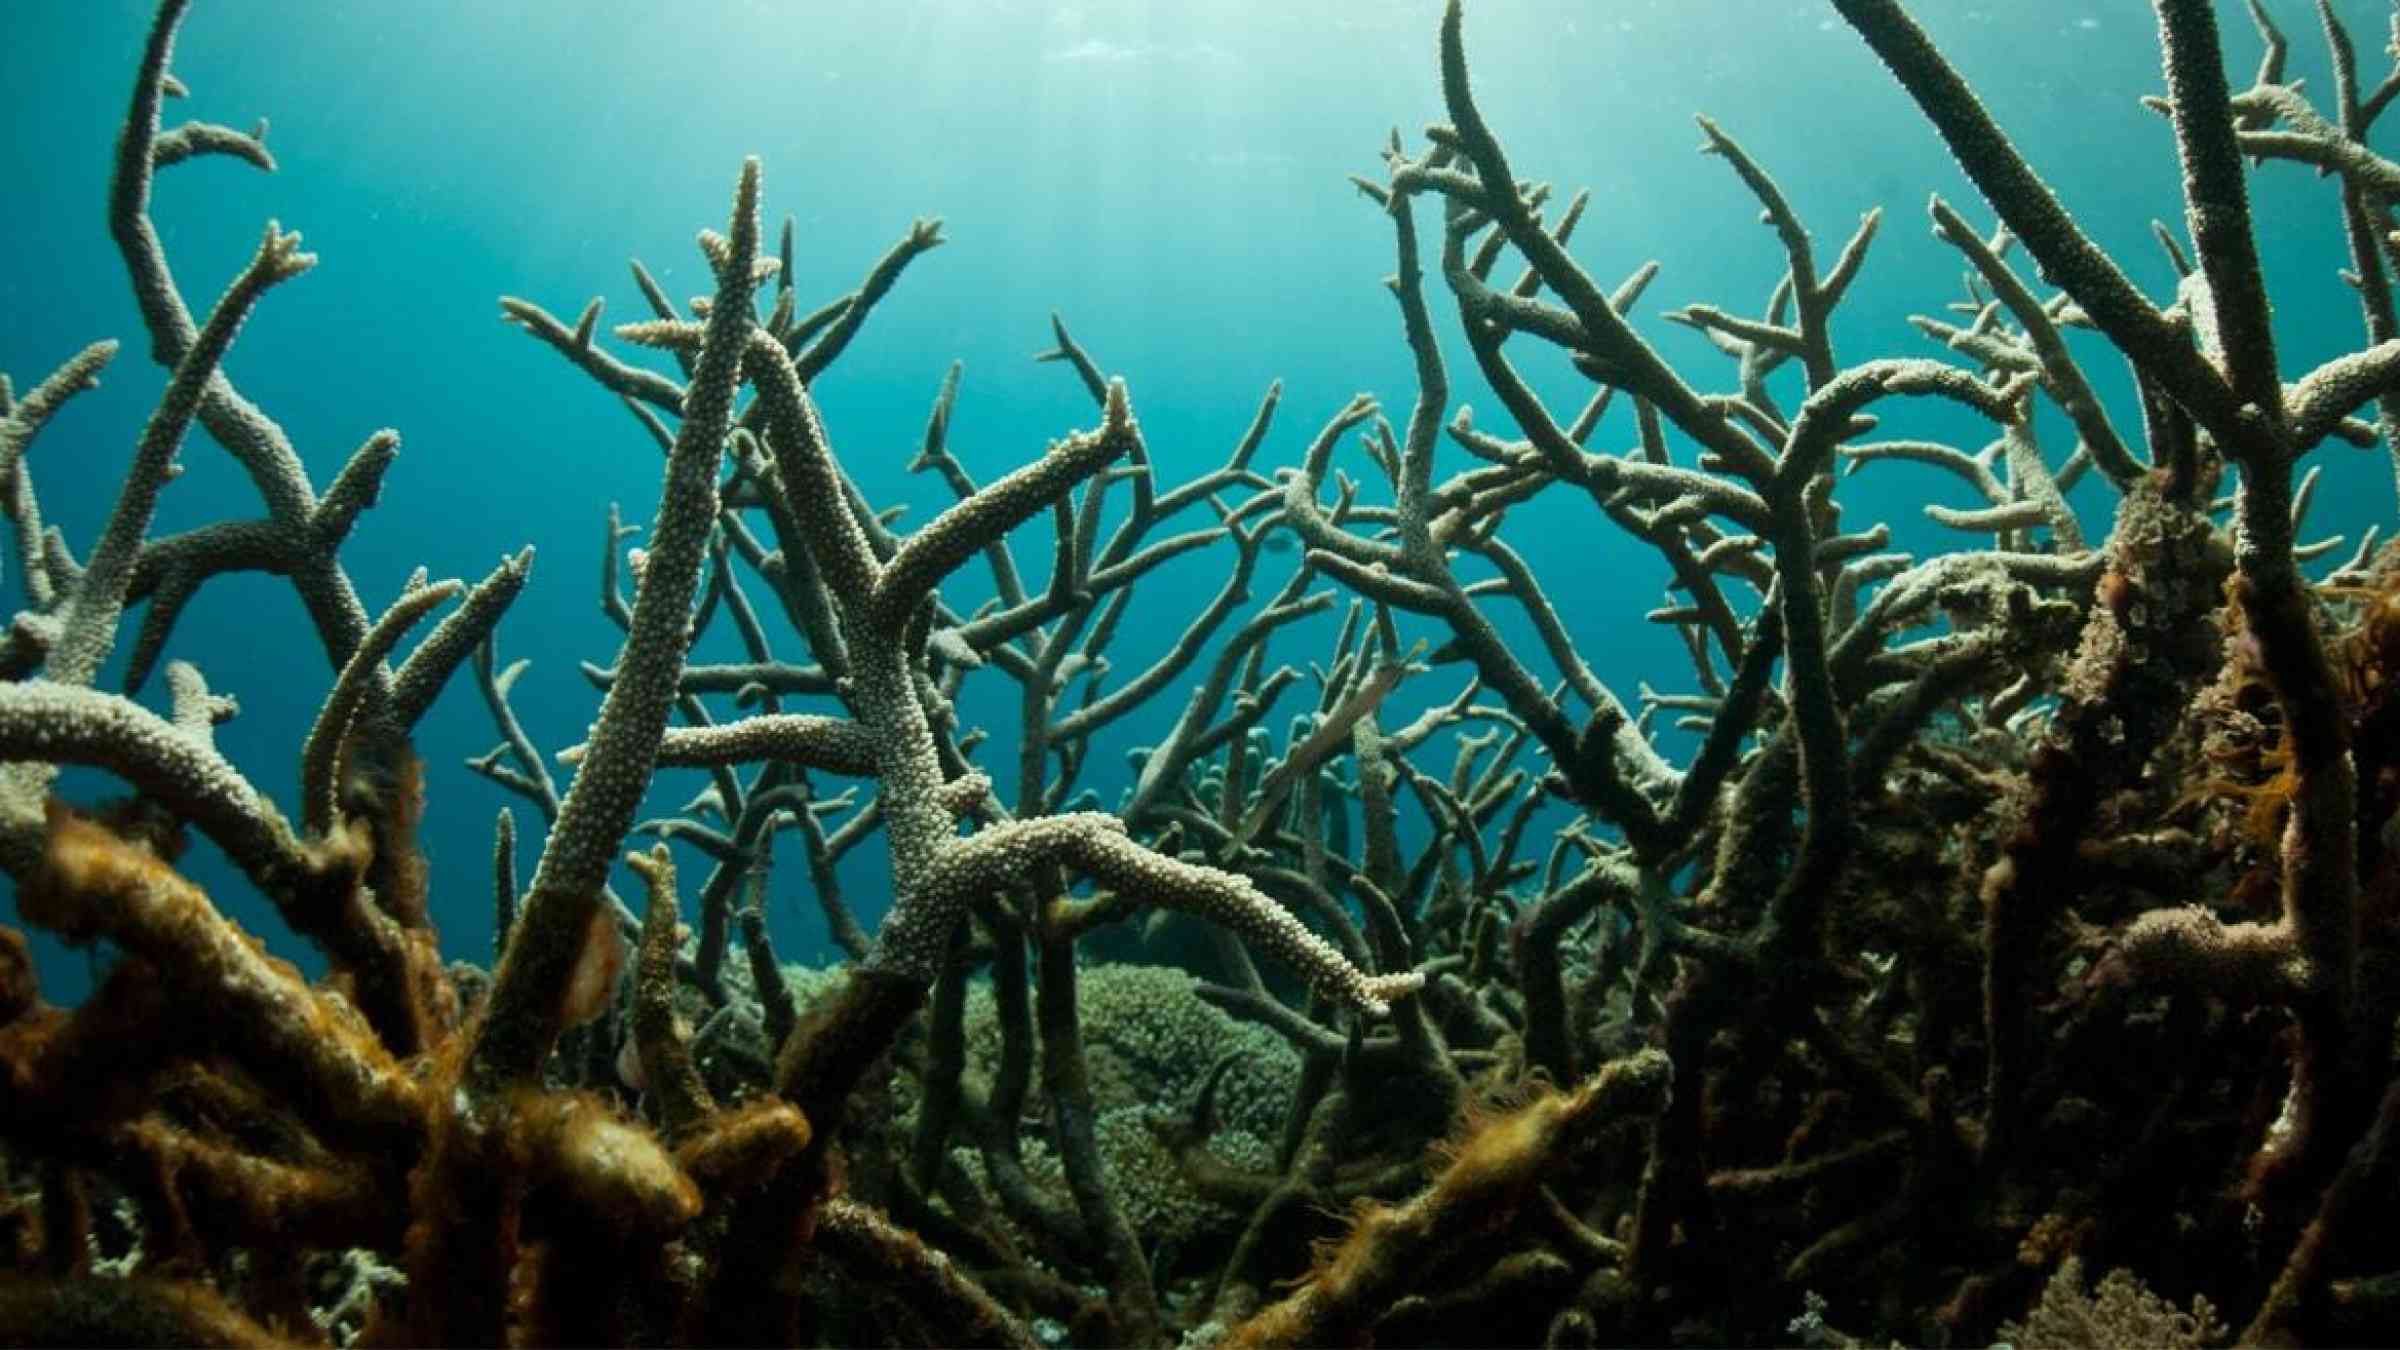 Field of dead corals, due to warming oceans